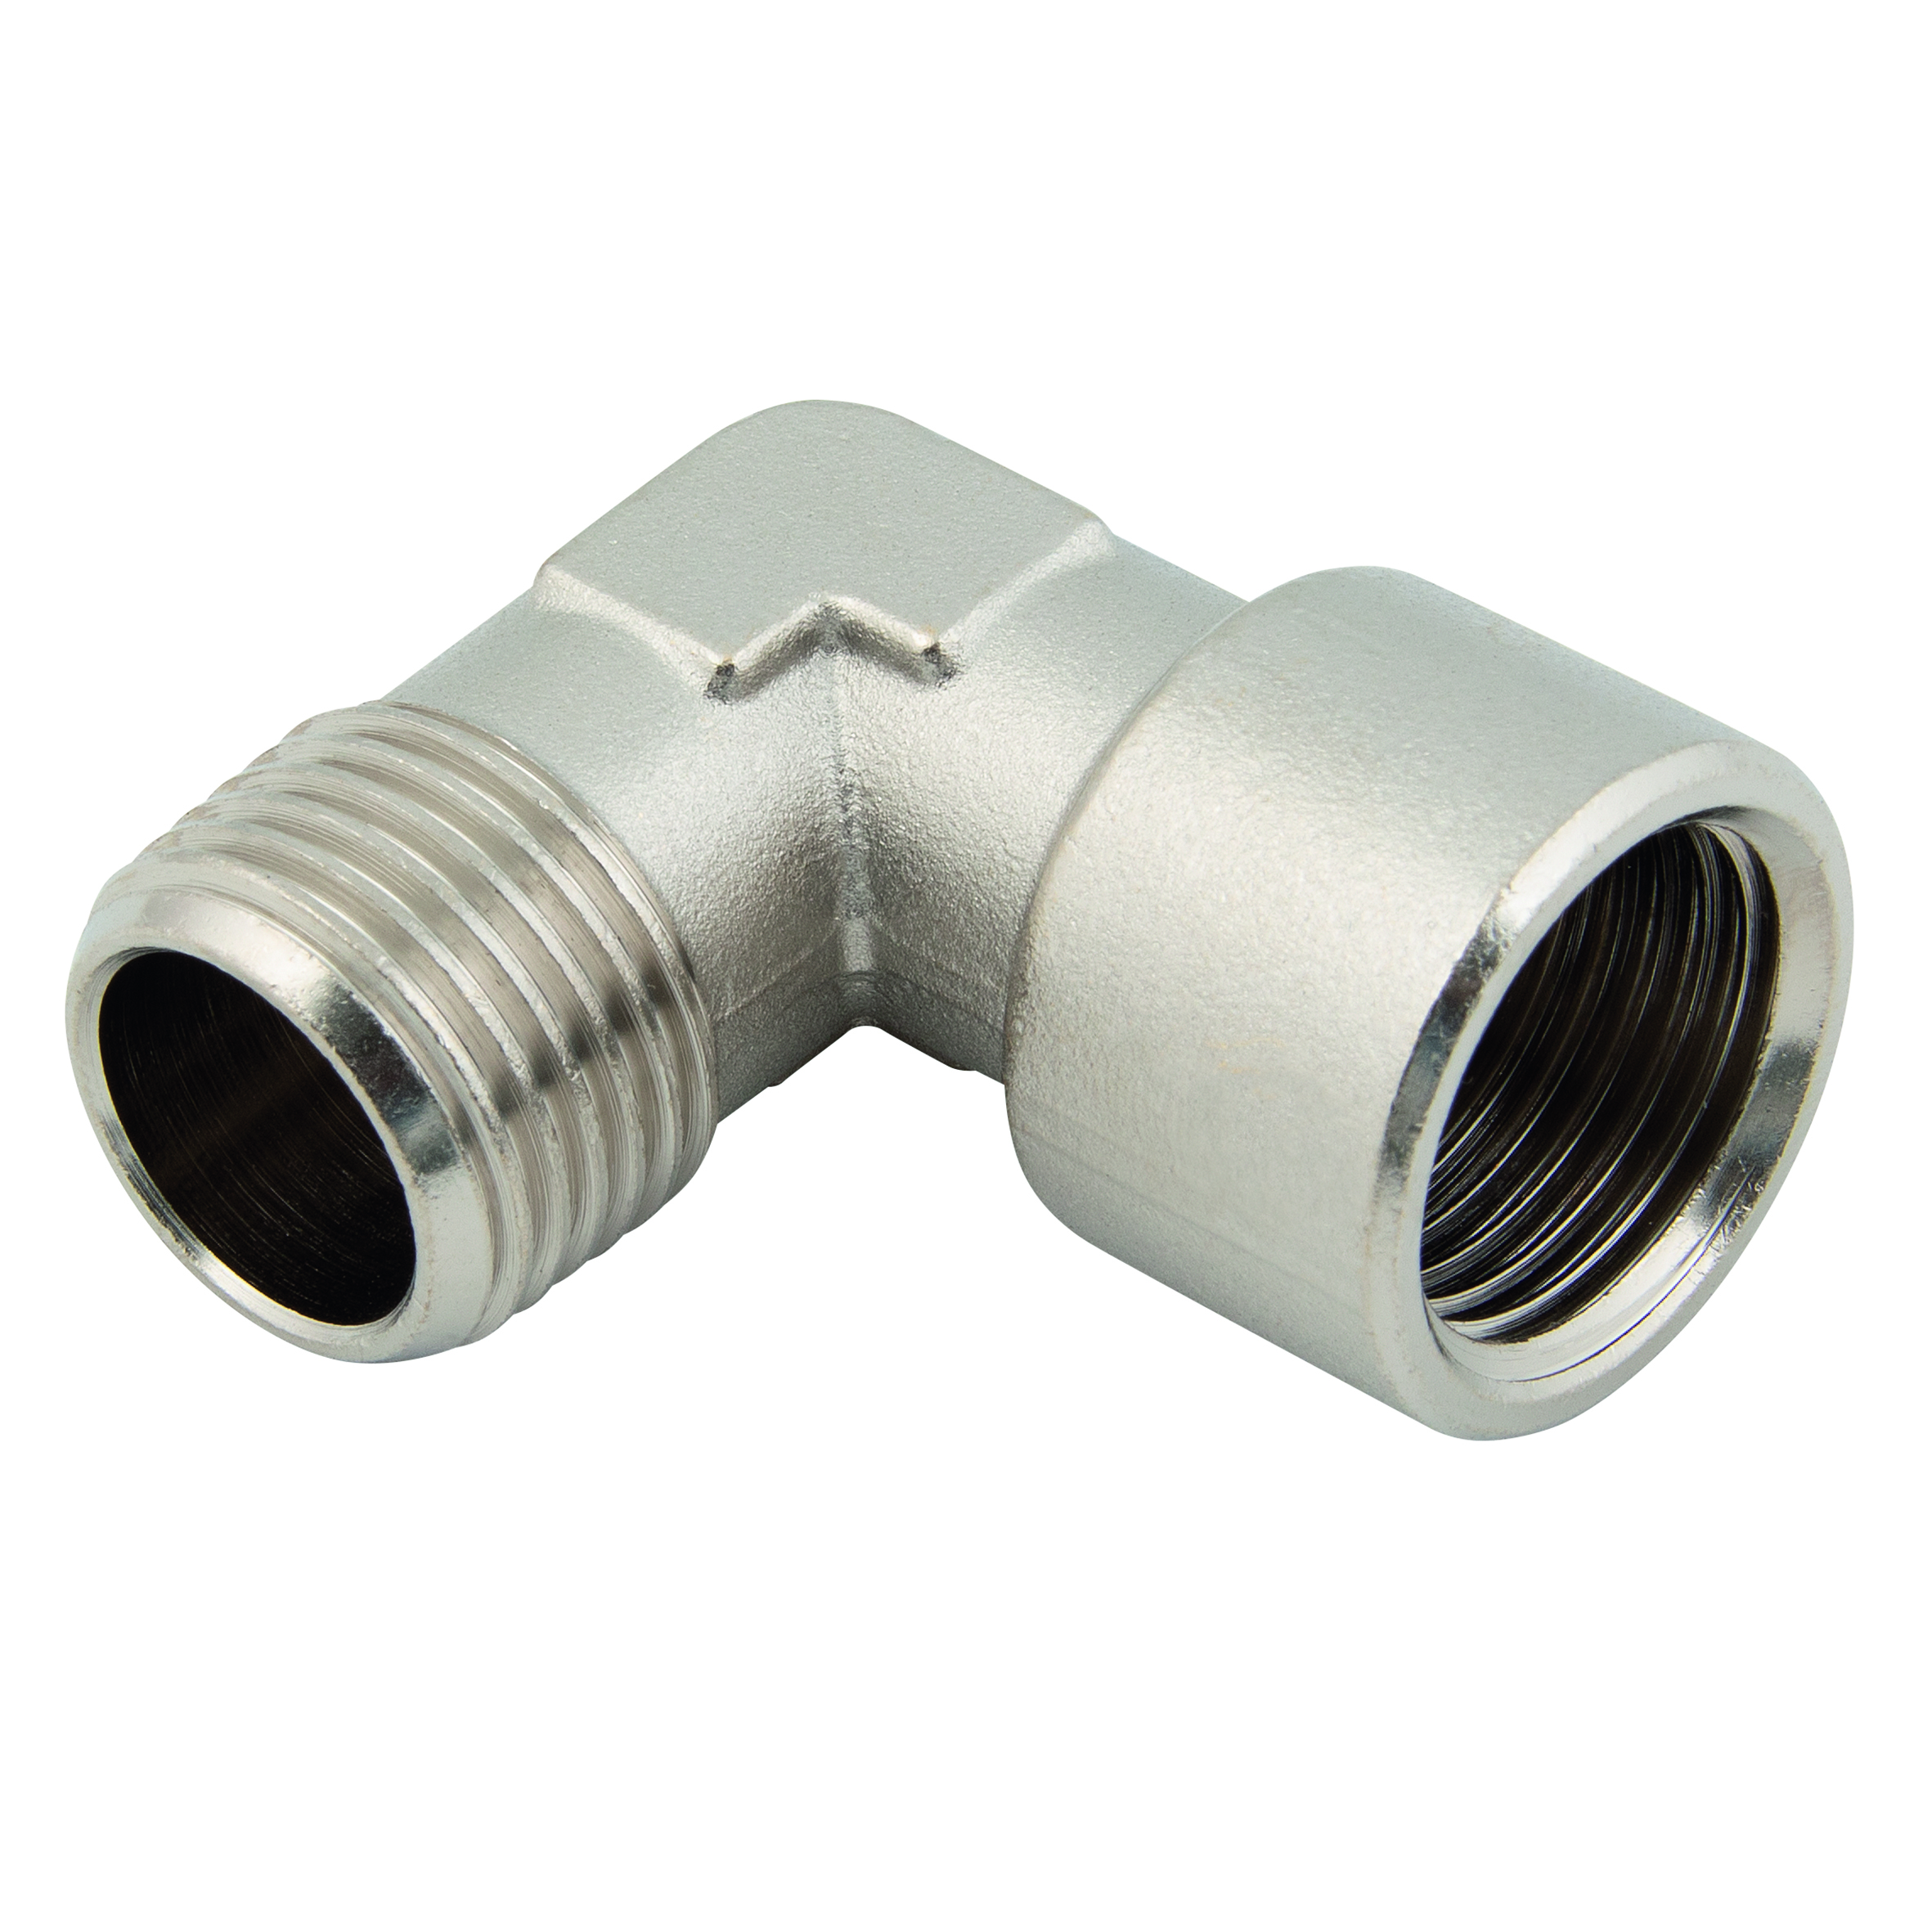 1" BSPT Male x 1" BSPP Female Equal Elbow